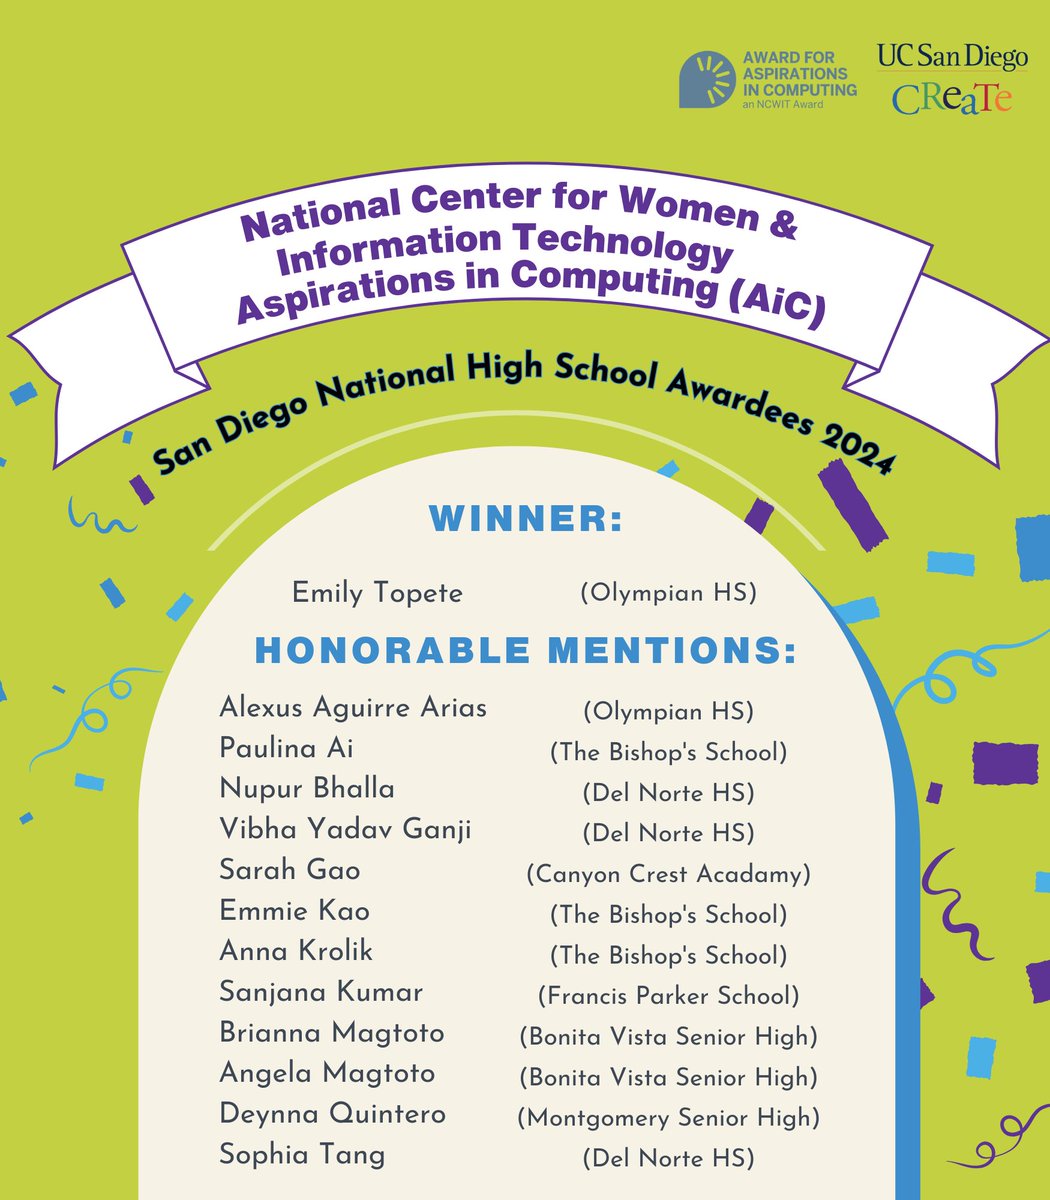 🏆 Congratulations to these brilliant students for their outstanding achievements in Computer Science! 🌟 We're thrilled to announce that they've been nationally recognized by NCWIT for their exceptional contributions to the field. 👏 #NCWIT #ComputerScience #FutureLeaders